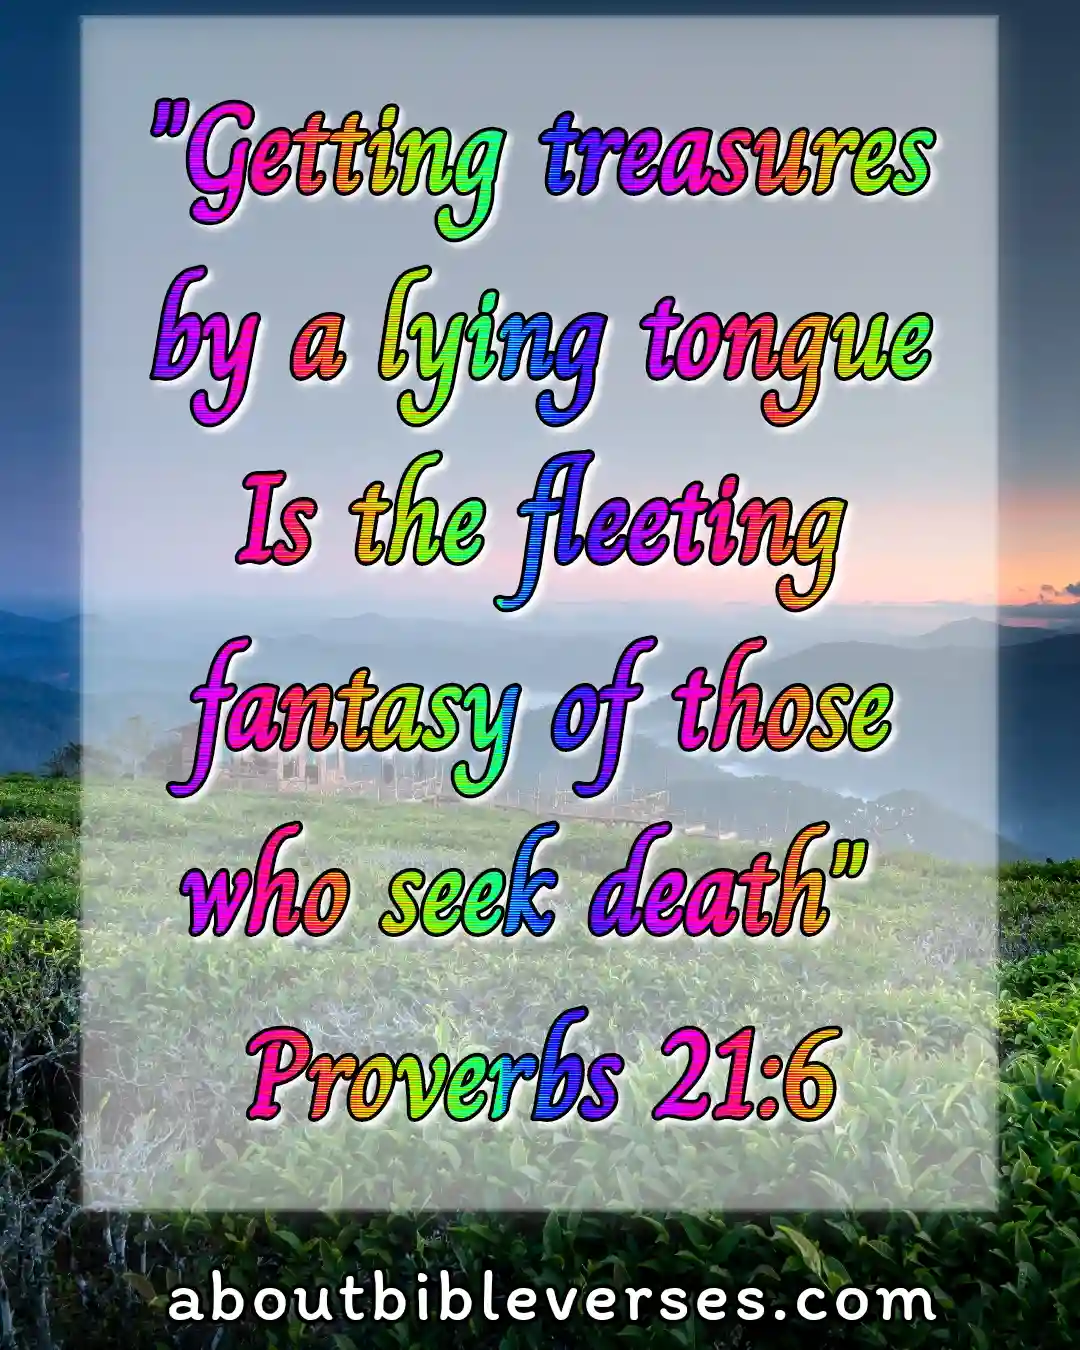 Bible Verses About Wealth And Prosperity (Proverbs 21:6)